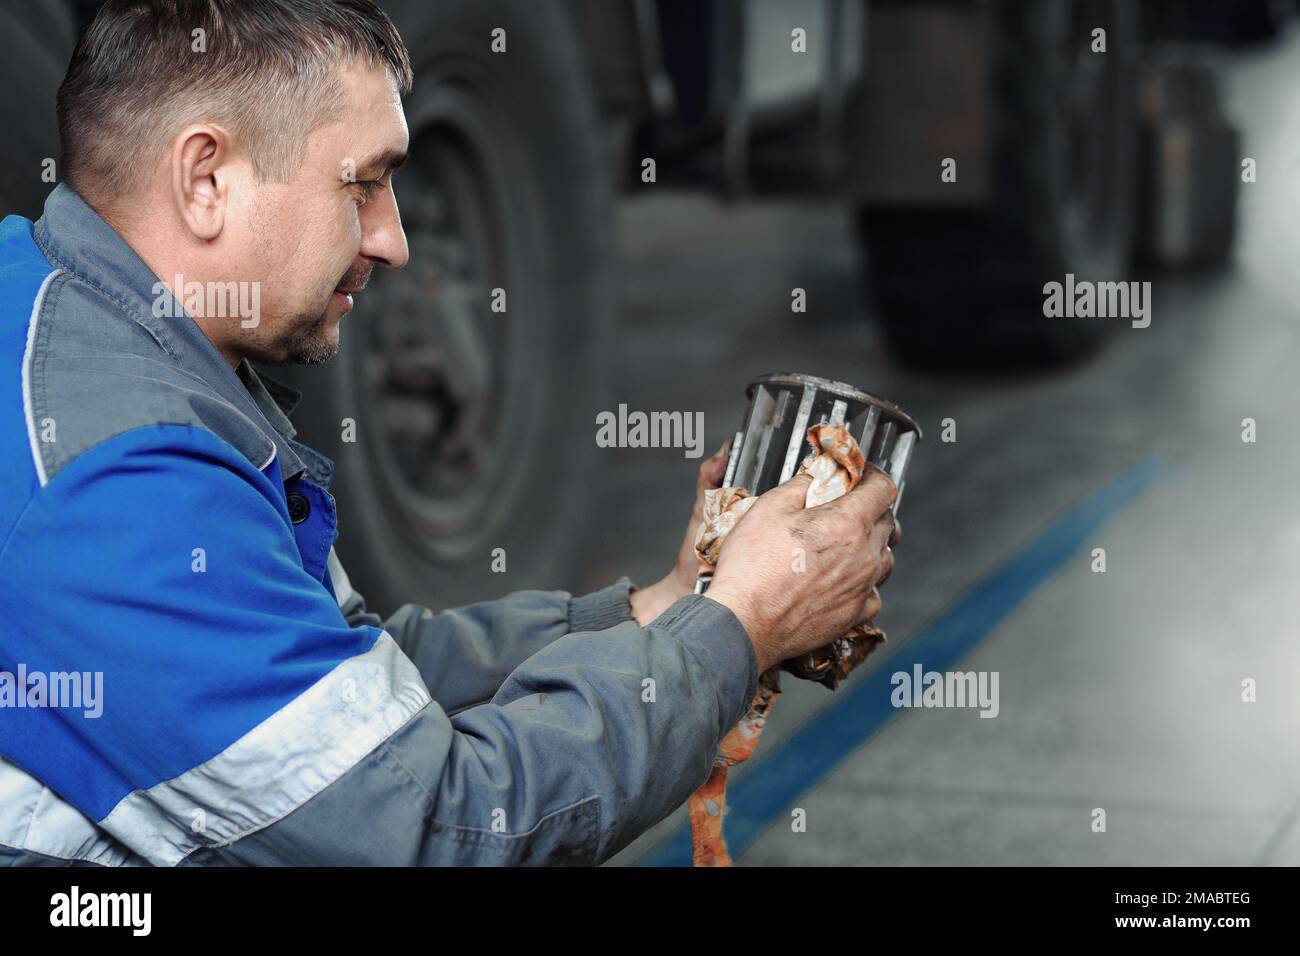 Auto mechanic repairs truck. Professional repair and diagnostics of cargo tractors and equipment. Mechanic in workshop considers spare parts.. Stock Photo